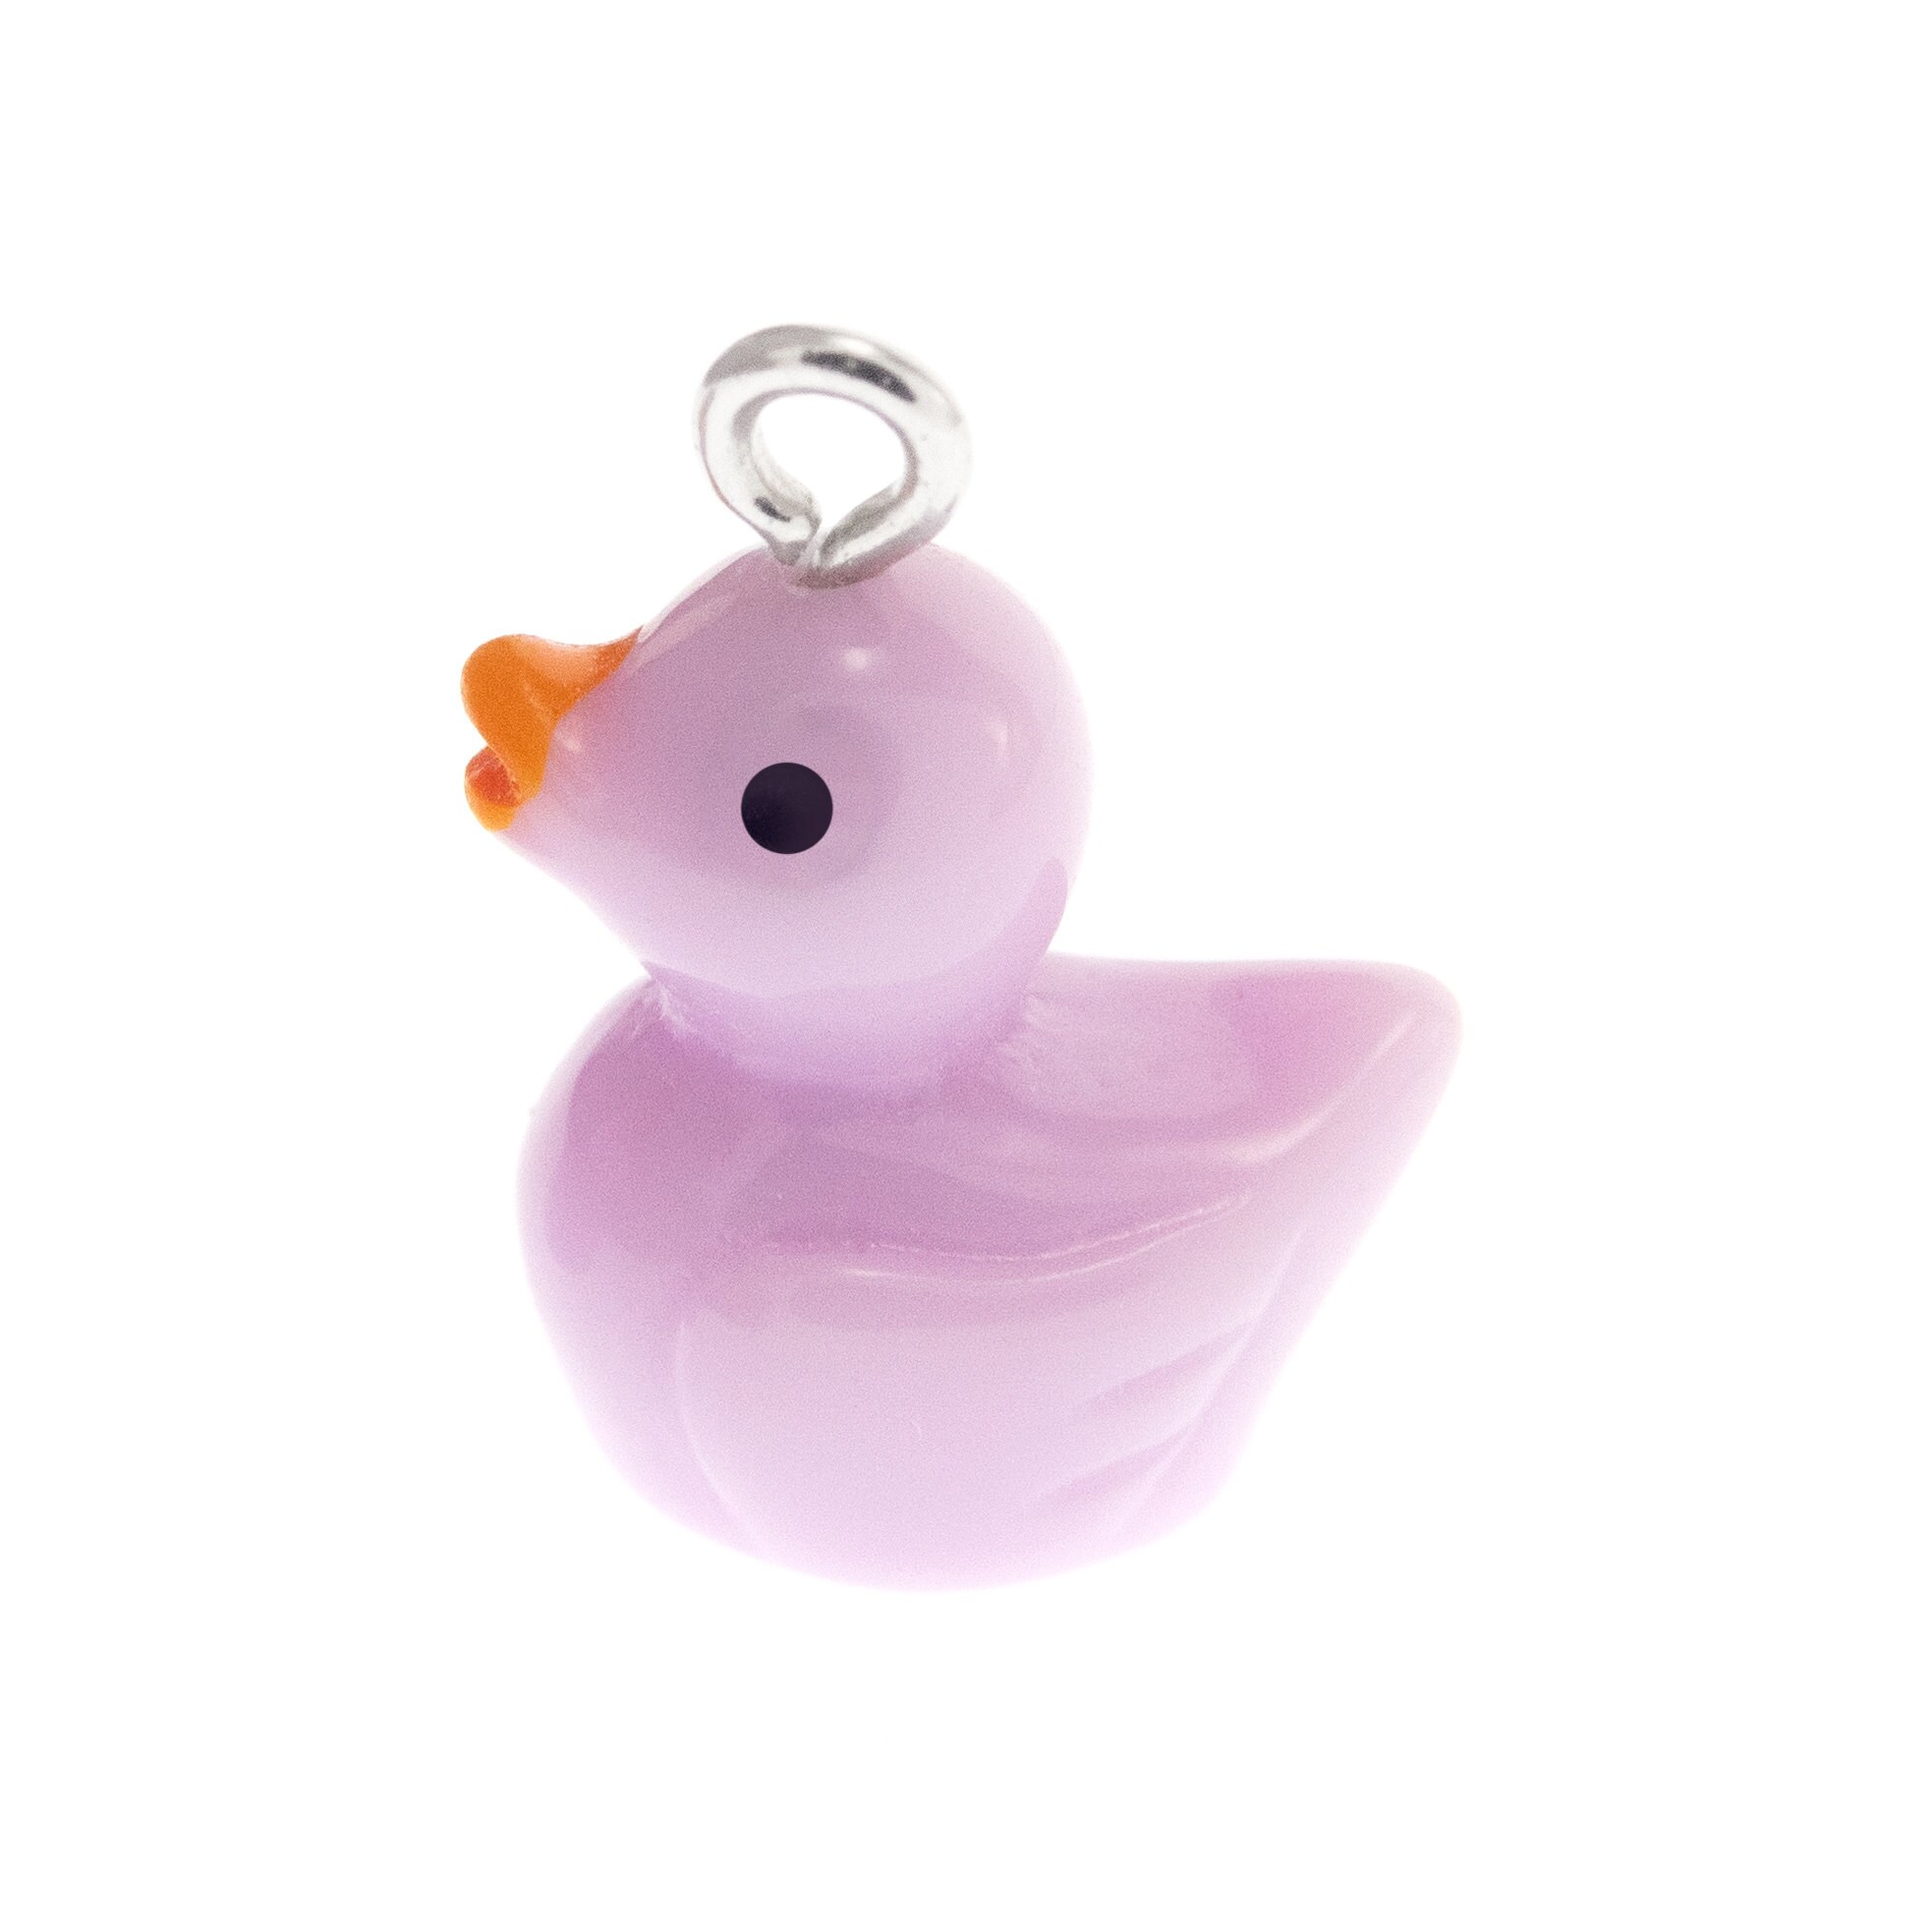 happy lucky necklace with rubber duck pendant